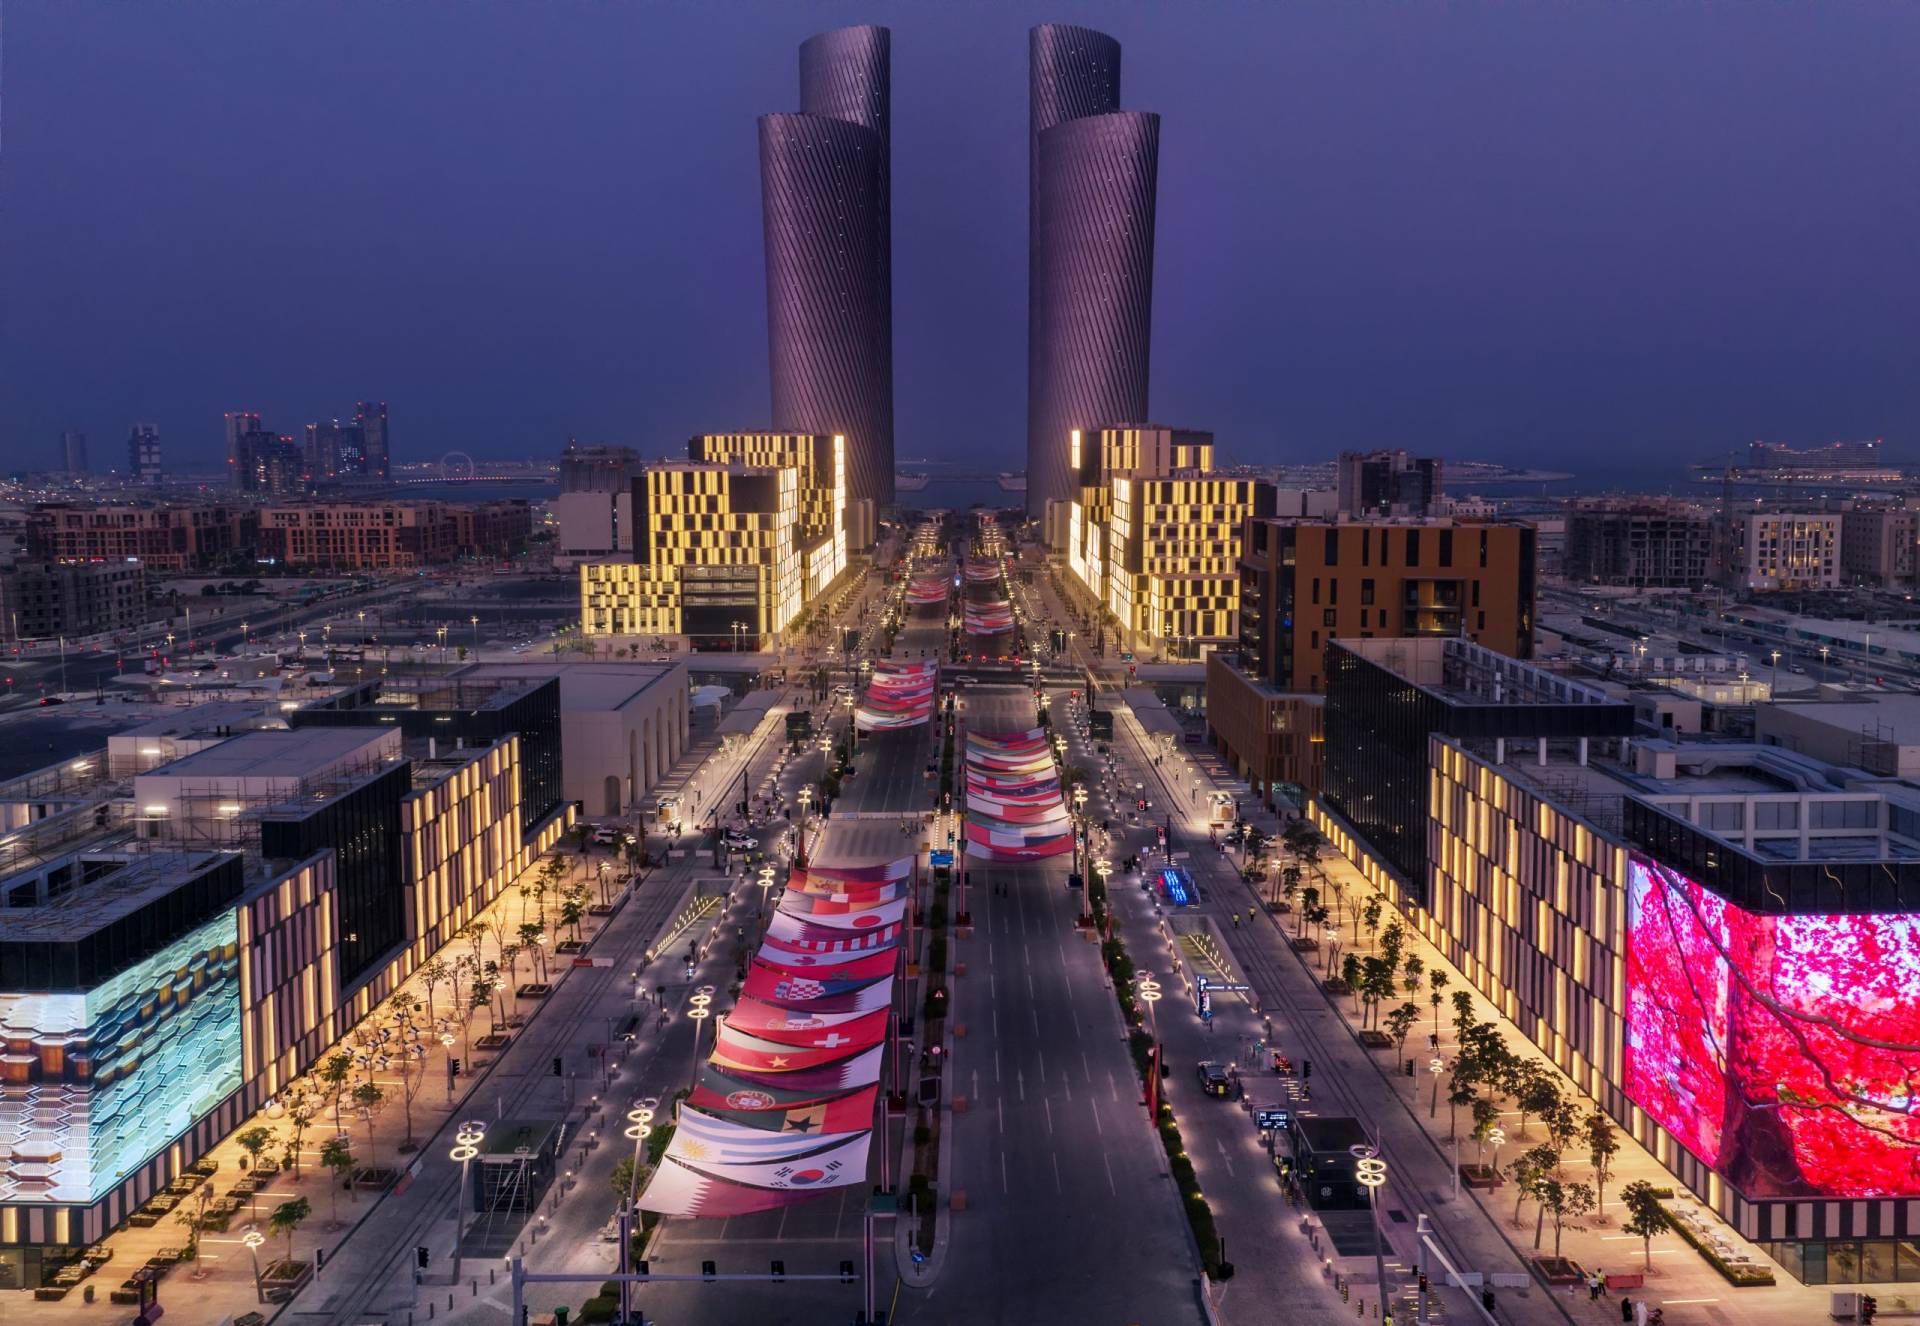 Lusail Boulevard's First Residential Building: The Lane Residence